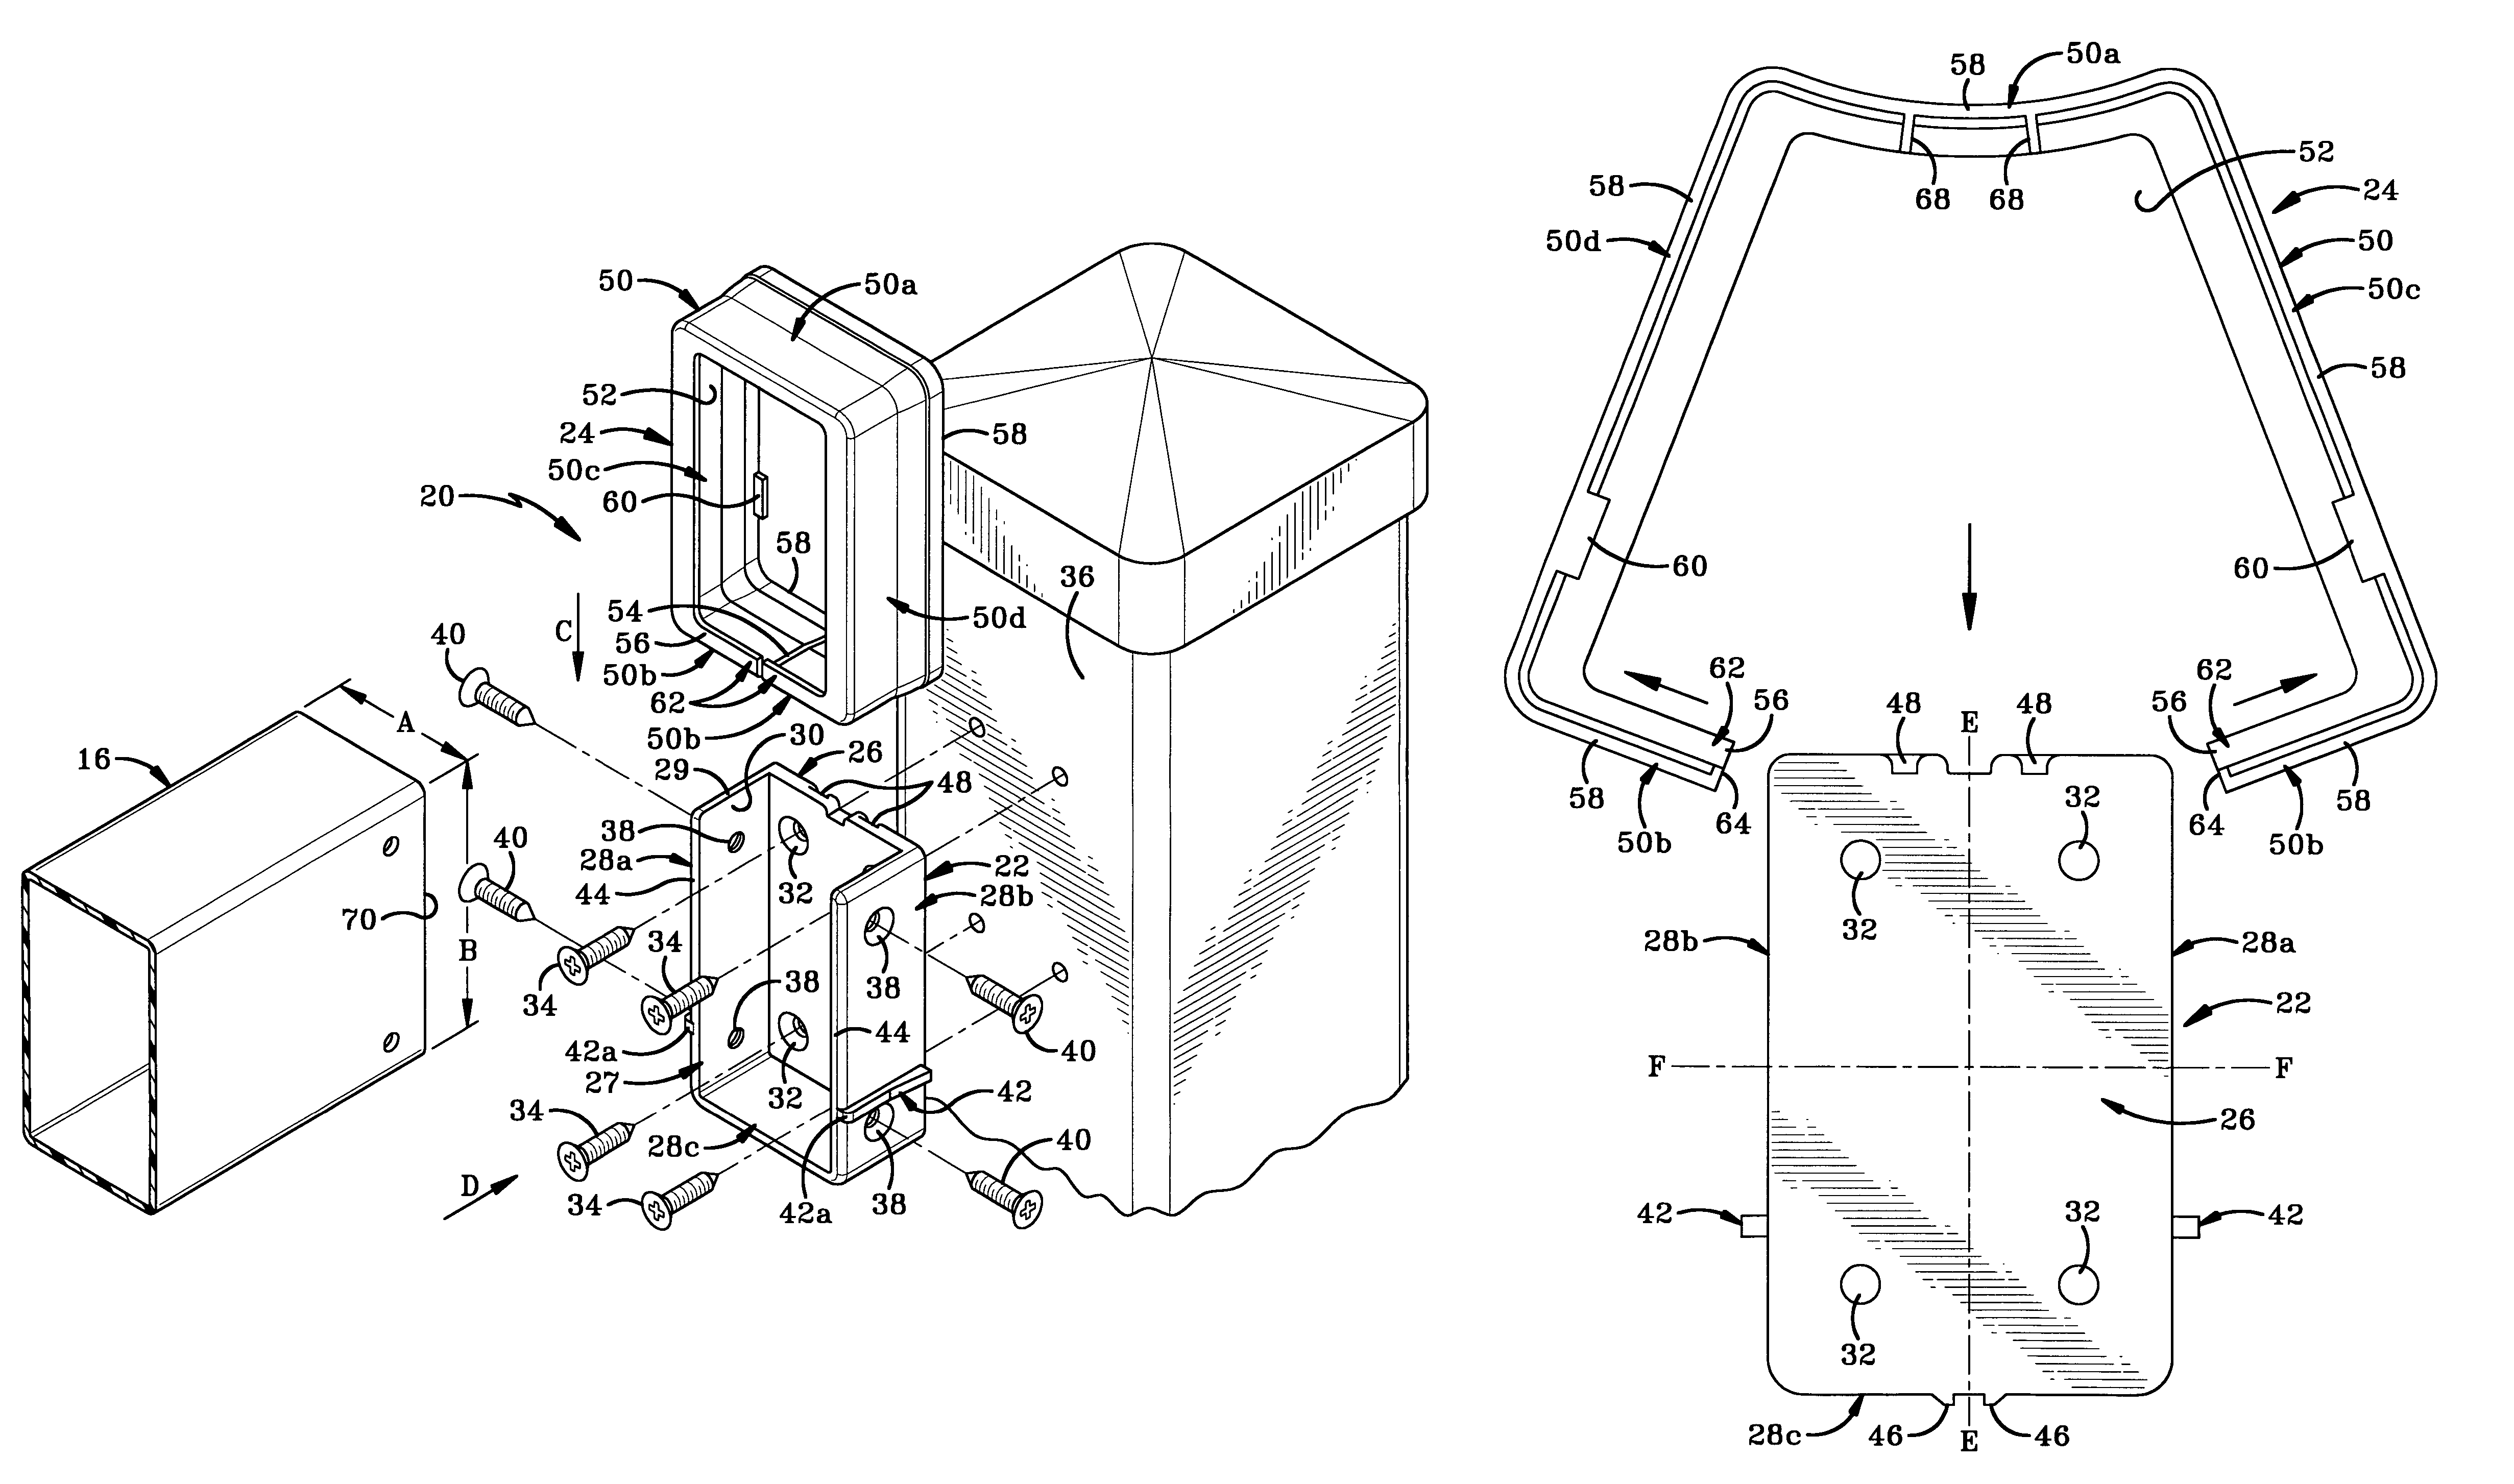 Mounting bracket and snap-on cover assembly for use therewith